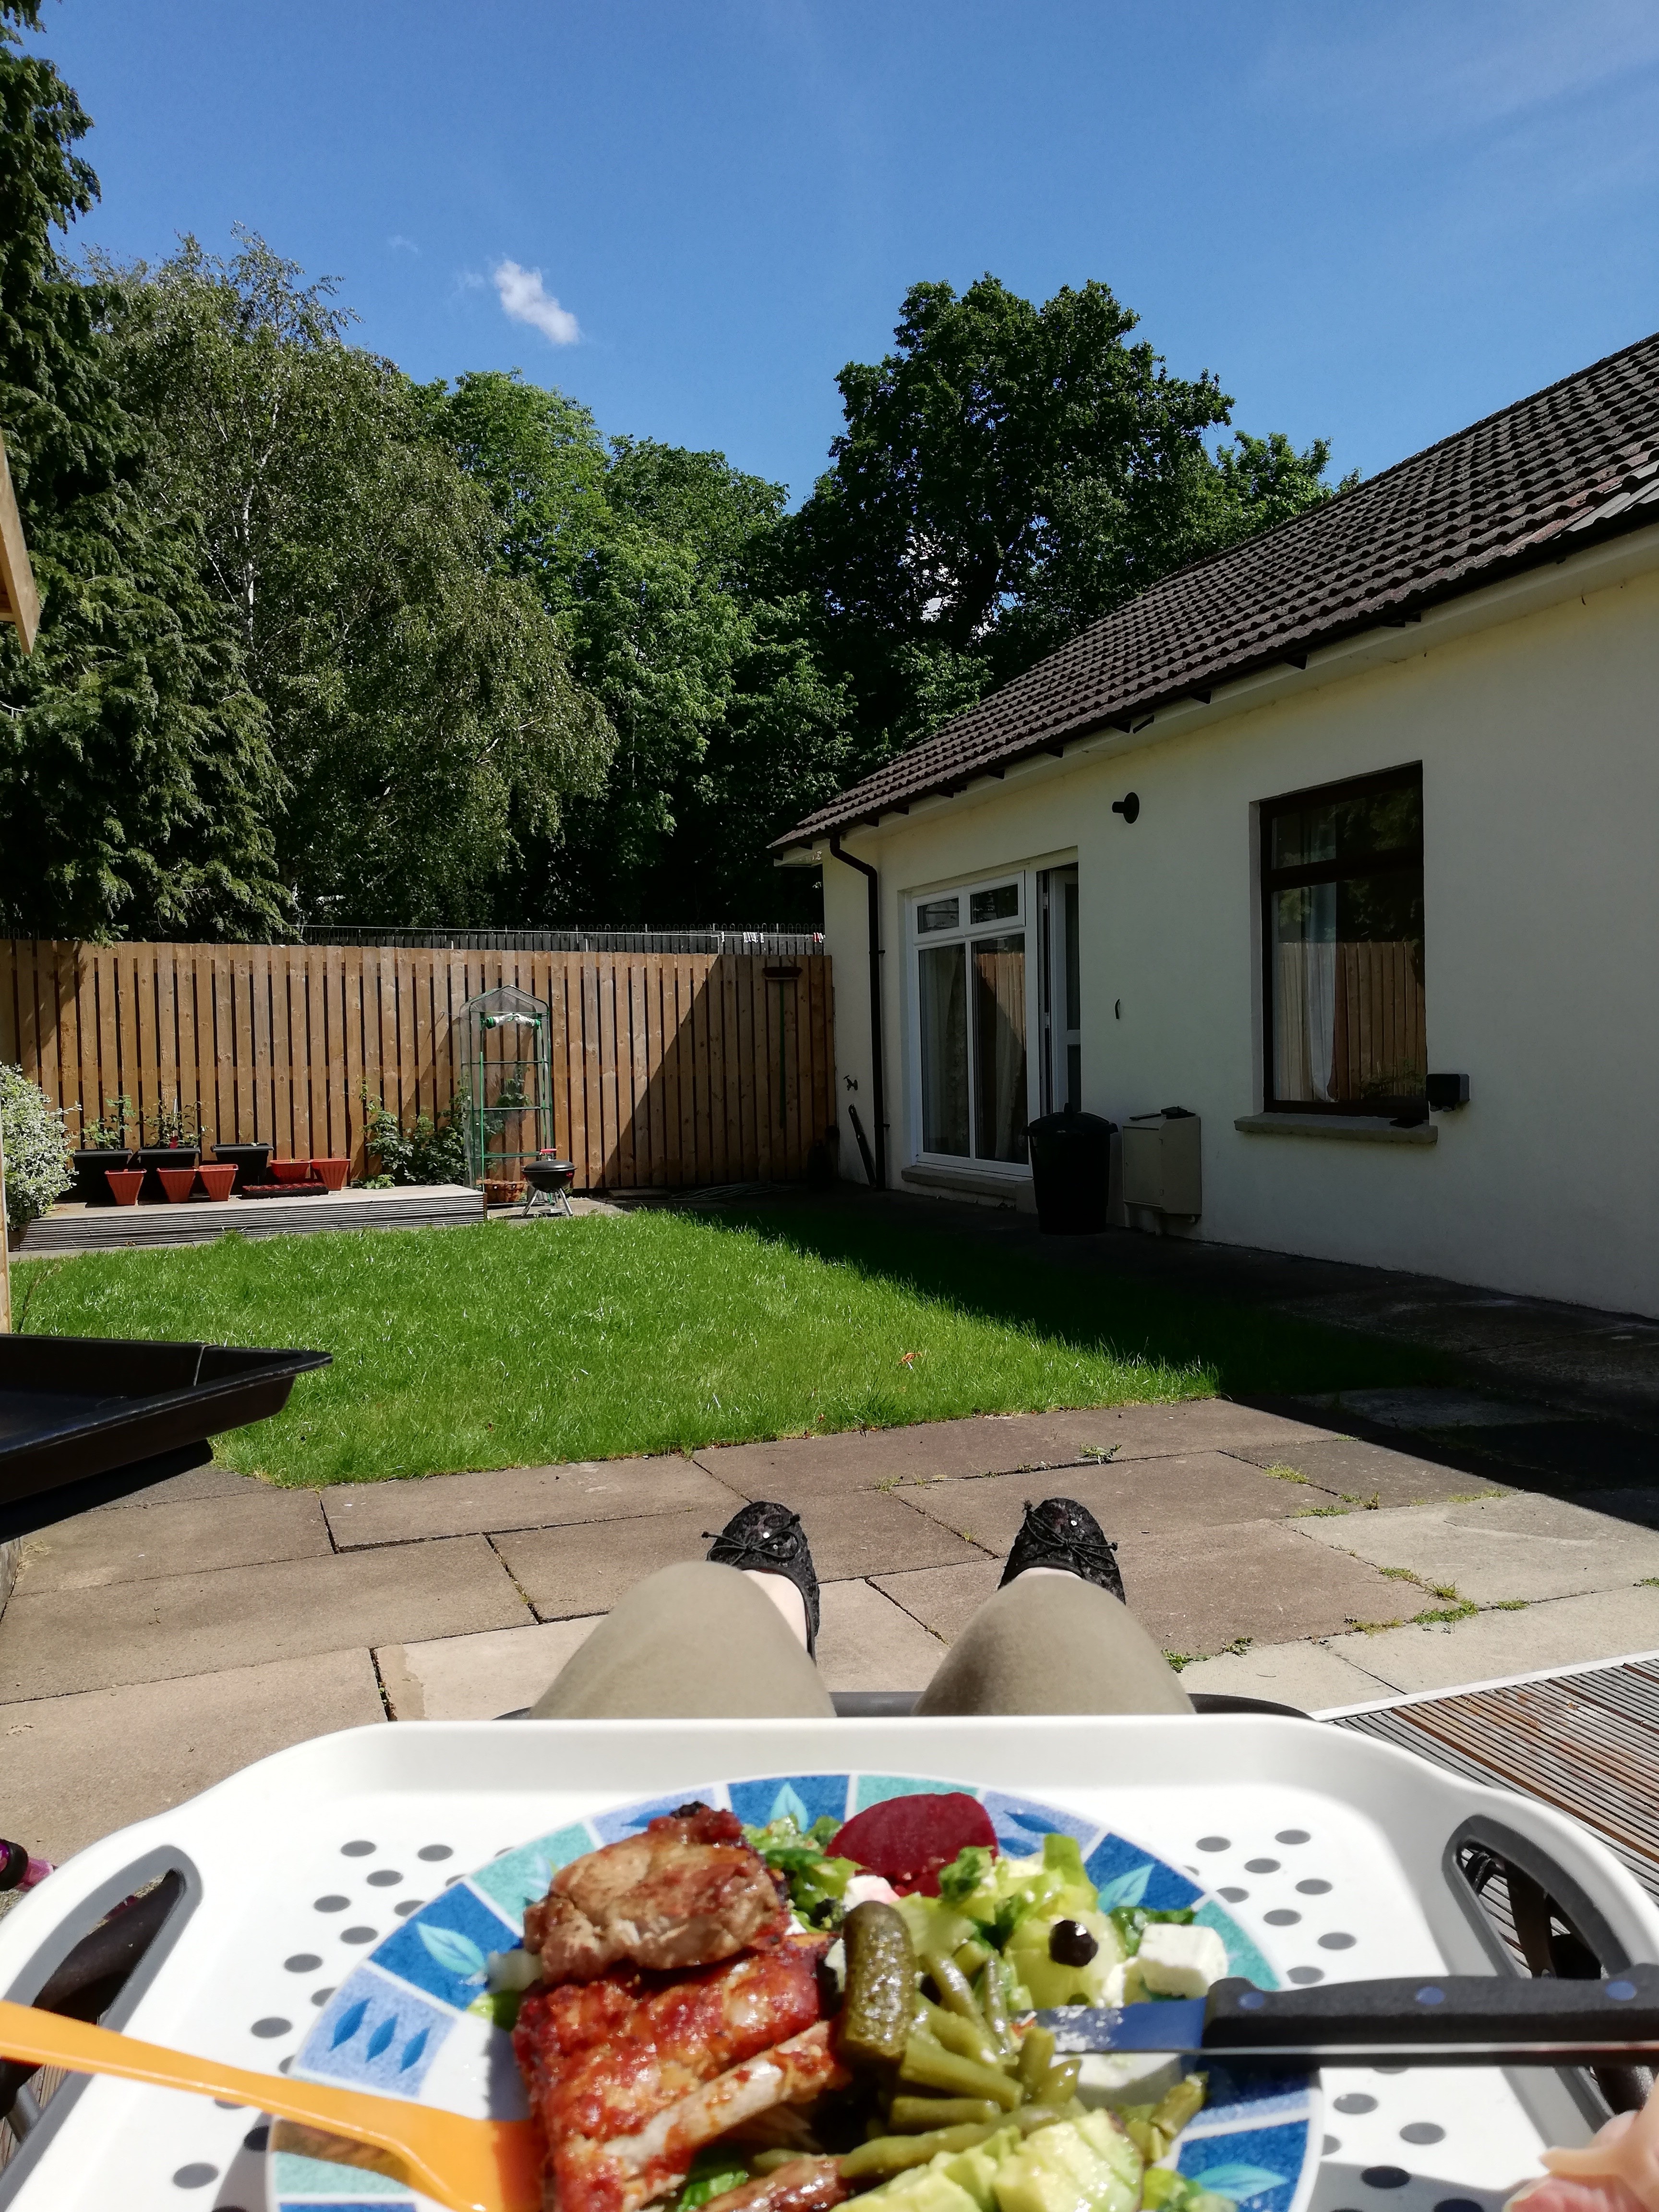 Char's view while lying on the garden recliner. You can see her feet and her plate of food. In the distance a patch of grass, wooden fence and trees in the distance.